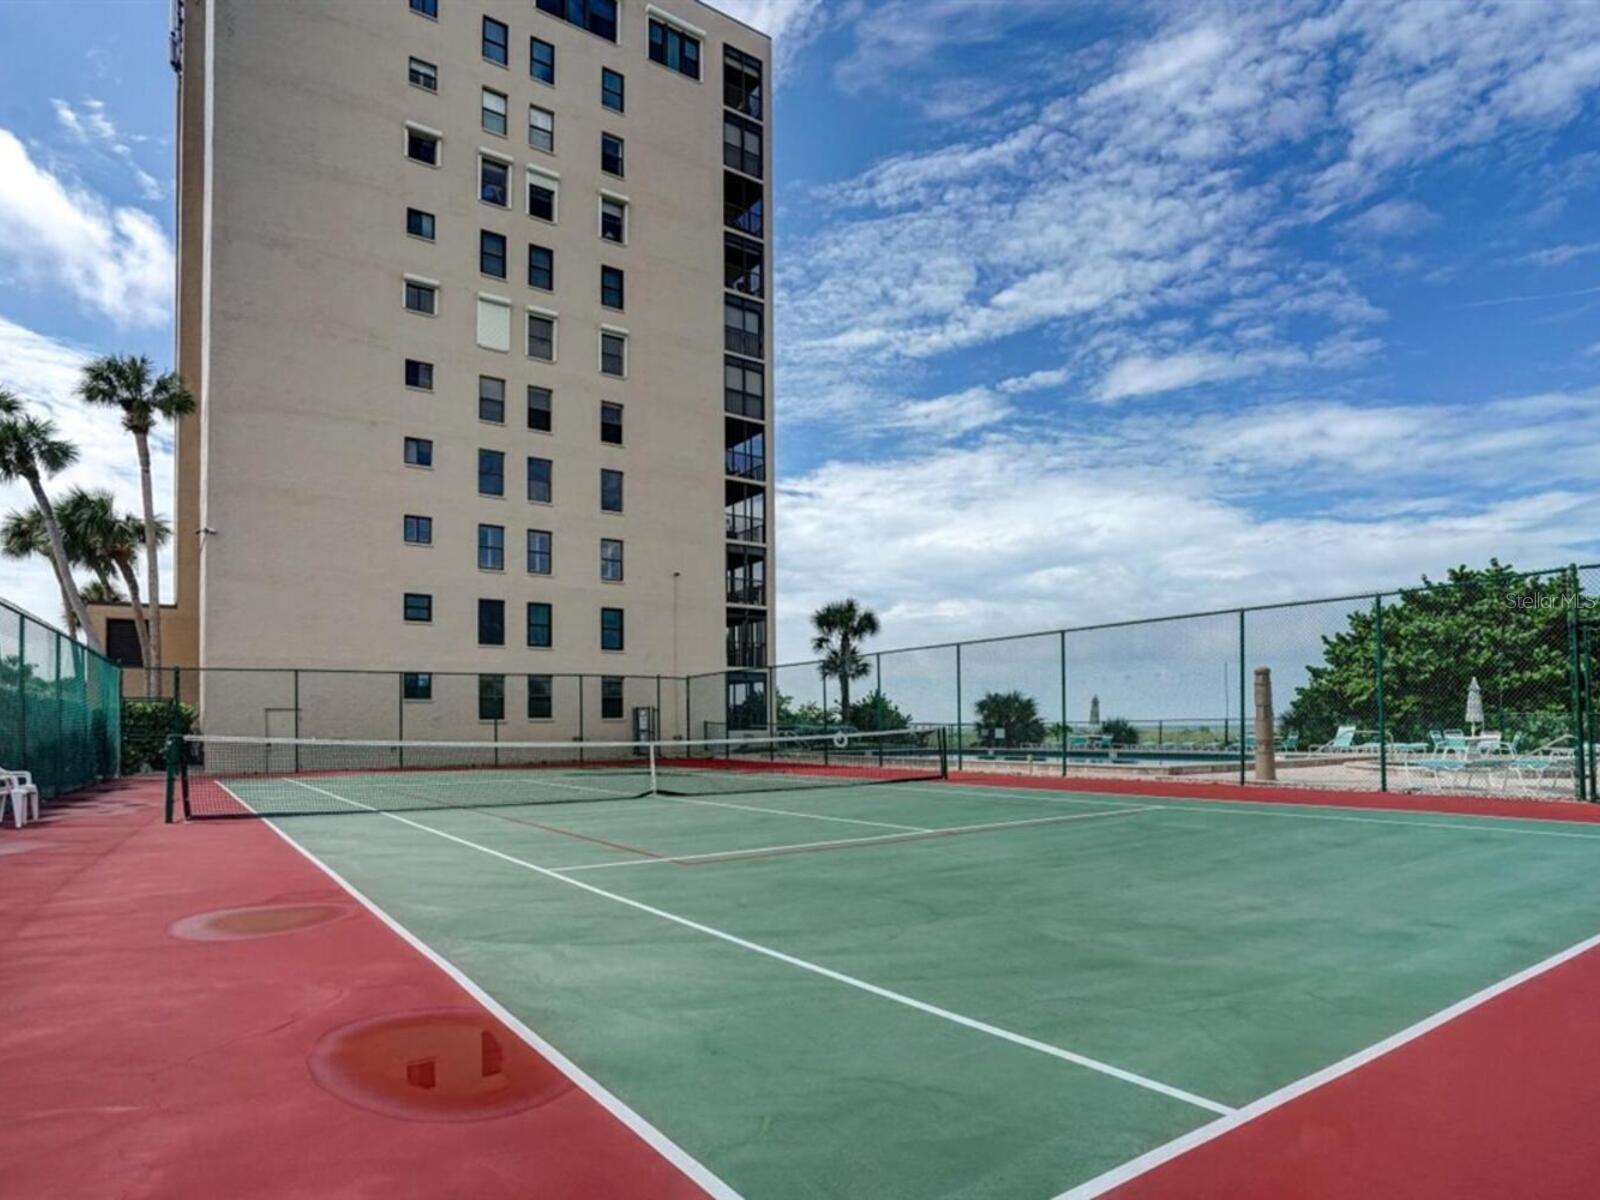 Tennis & Pickle Ball Court is available next to Swimming Pool & Spa.